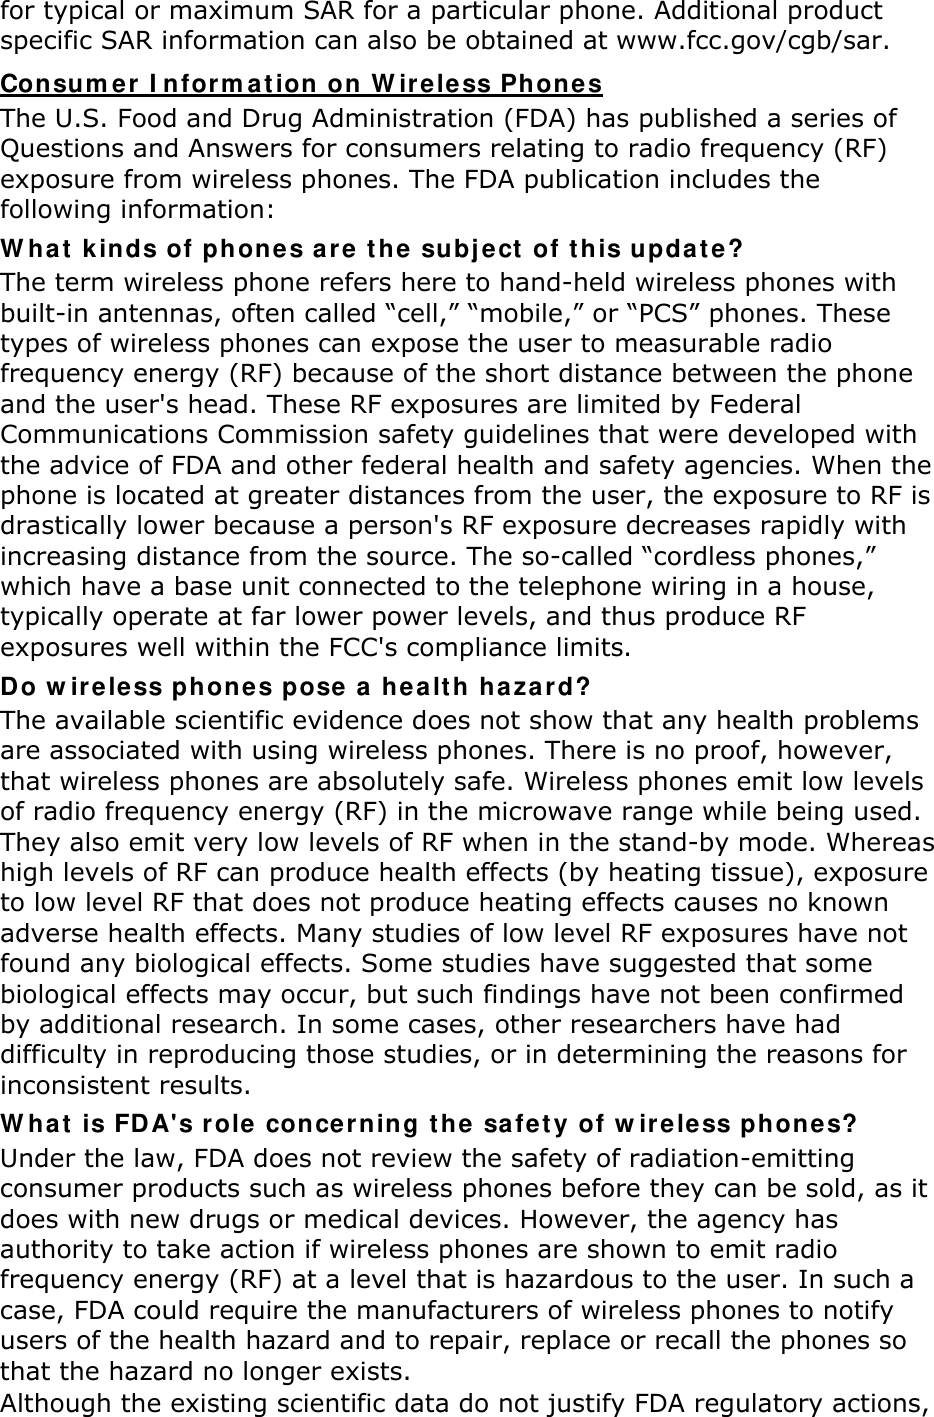 for typical or maximum SAR for a particular phone. Additional product specific SAR information can also be obtained at www.fcc.gov/cgb/sar. Consumer Information on Wireless Phones The U.S. Food and Drug Administration (FDA) has published a series of Questions and Answers for consumers relating to radio frequency (RF) exposure from wireless phones. The FDA publication includes the following information: What kinds of phones are the subject of this update? The term wireless phone refers here to hand-held wireless phones with built-in antennas, often called “cell,” “mobile,” or “PCS” phones. These types of wireless phones can expose the user to measurable radio frequency energy (RF) because of the short distance between the phone and the user&apos;s head. These RF exposures are limited by Federal Communications Commission safety guidelines that were developed with the advice of FDA and other federal health and safety agencies. When the phone is located at greater distances from the user, the exposure to RF is drastically lower because a person&apos;s RF exposure decreases rapidly with increasing distance from the source. The so-called “cordless phones,” which have a base unit connected to the telephone wiring in a house, typically operate at far lower power levels, and thus produce RF exposures well within the FCC&apos;s compliance limits. Do wireless phones pose a health hazard? The available scientific evidence does not show that any health problems are associated with using wireless phones. There is no proof, however, that wireless phones are absolutely safe. Wireless phones emit low levels of radio frequency energy (RF) in the microwave range while being used. They also emit very low levels of RF when in the stand-by mode. Whereas high levels of RF can produce health effects (by heating tissue), exposure to low level RF that does not produce heating effects causes no known adverse health effects. Many studies of low level RF exposures have not found any biological effects. Some studies have suggested that some biological effects may occur, but such findings have not been confirmed by additional research. In some cases, other researchers have had difficulty in reproducing those studies, or in determining the reasons for inconsistent results. What is FDA&apos;s role concerning the safety of wireless phones? Under the law, FDA does not review the safety of radiation-emitting consumer products such as wireless phones before they can be sold, as it does with new drugs or medical devices. However, the agency has authority to take action if wireless phones are shown to emit radio frequency energy (RF) at a level that is hazardous to the user. In such a case, FDA could require the manufacturers of wireless phones to notify users of the health hazard and to repair, replace or recall the phones so that the hazard no longer exists. Although the existing scientific data do not justify FDA regulatory actions, 